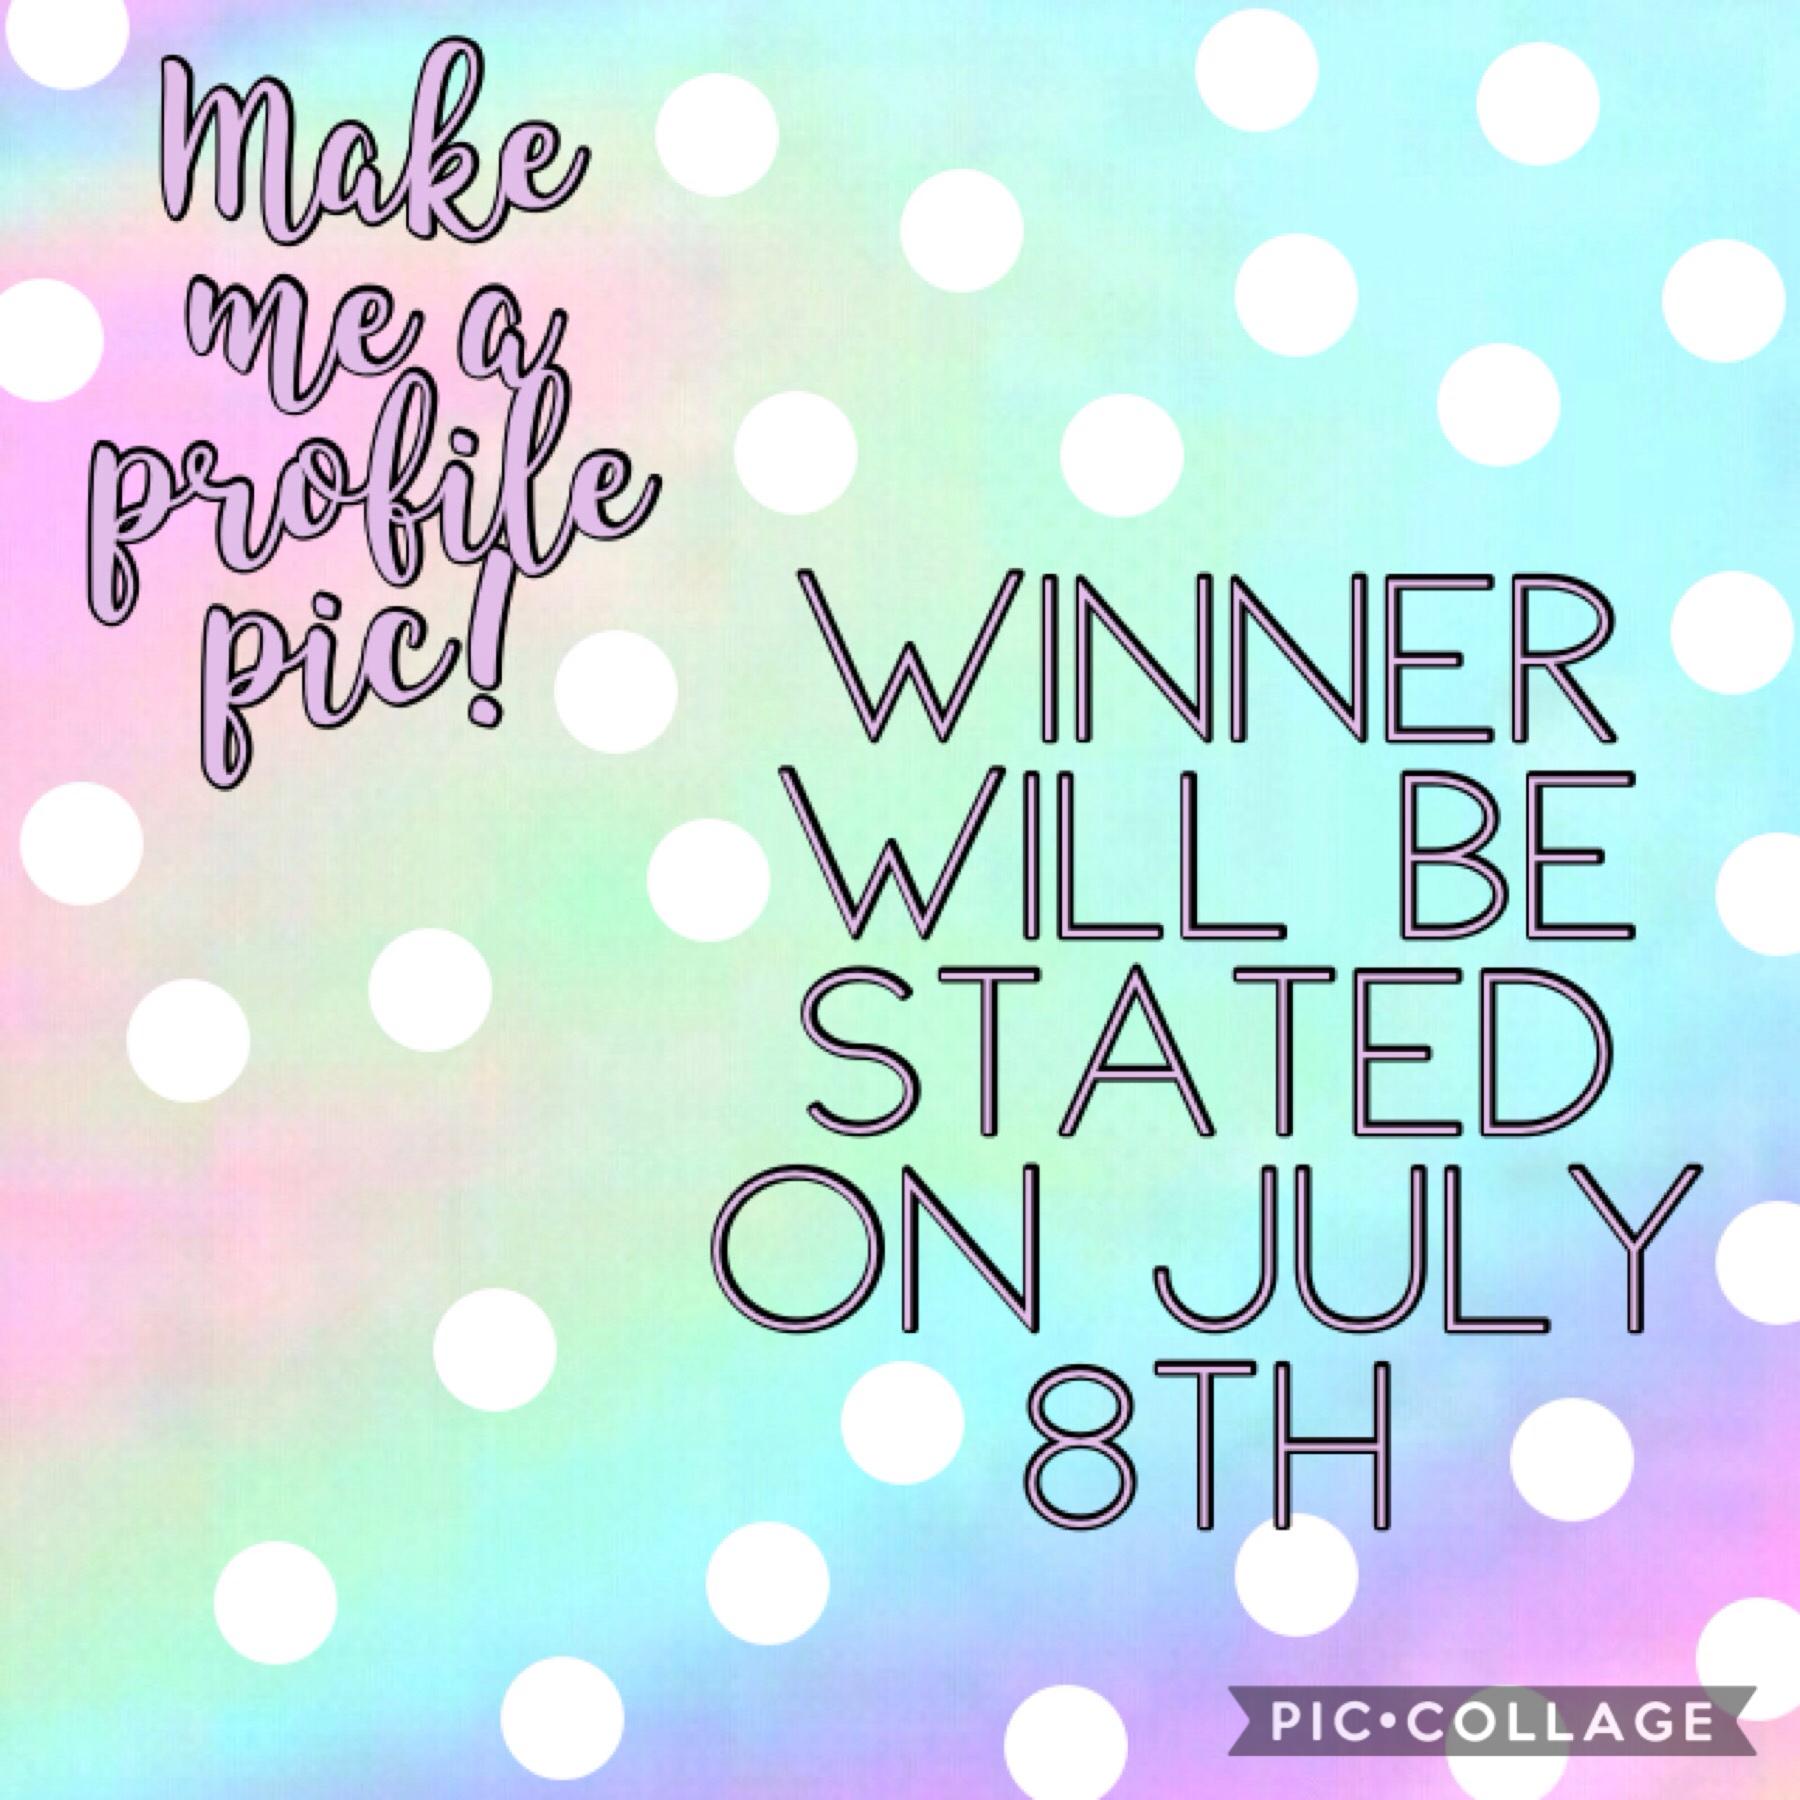 P L E A S E  R E A D!
The theme is a pastel, summery, trendy kind of vibe. Please make sure my name is on it!